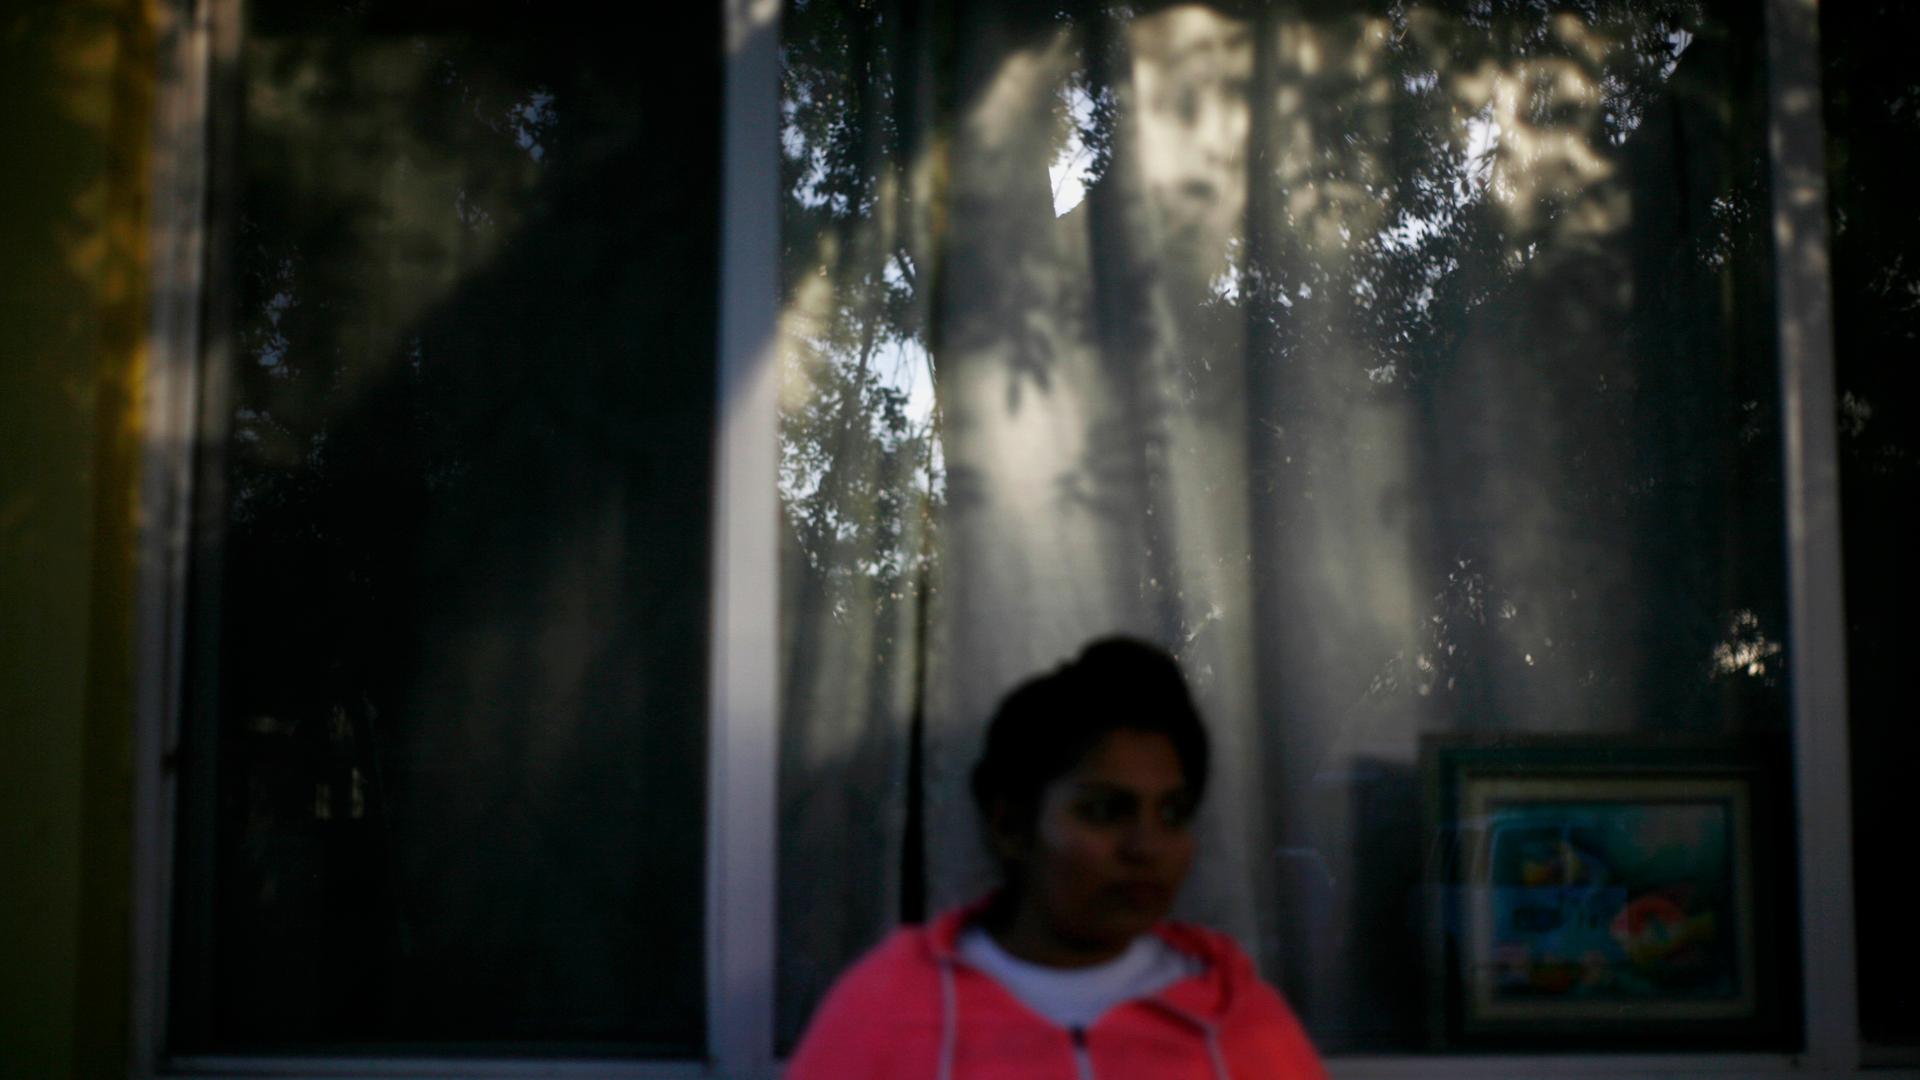 Blurry image of woman in pink hodded sweatshirt standing in front of window, with reflection of trees